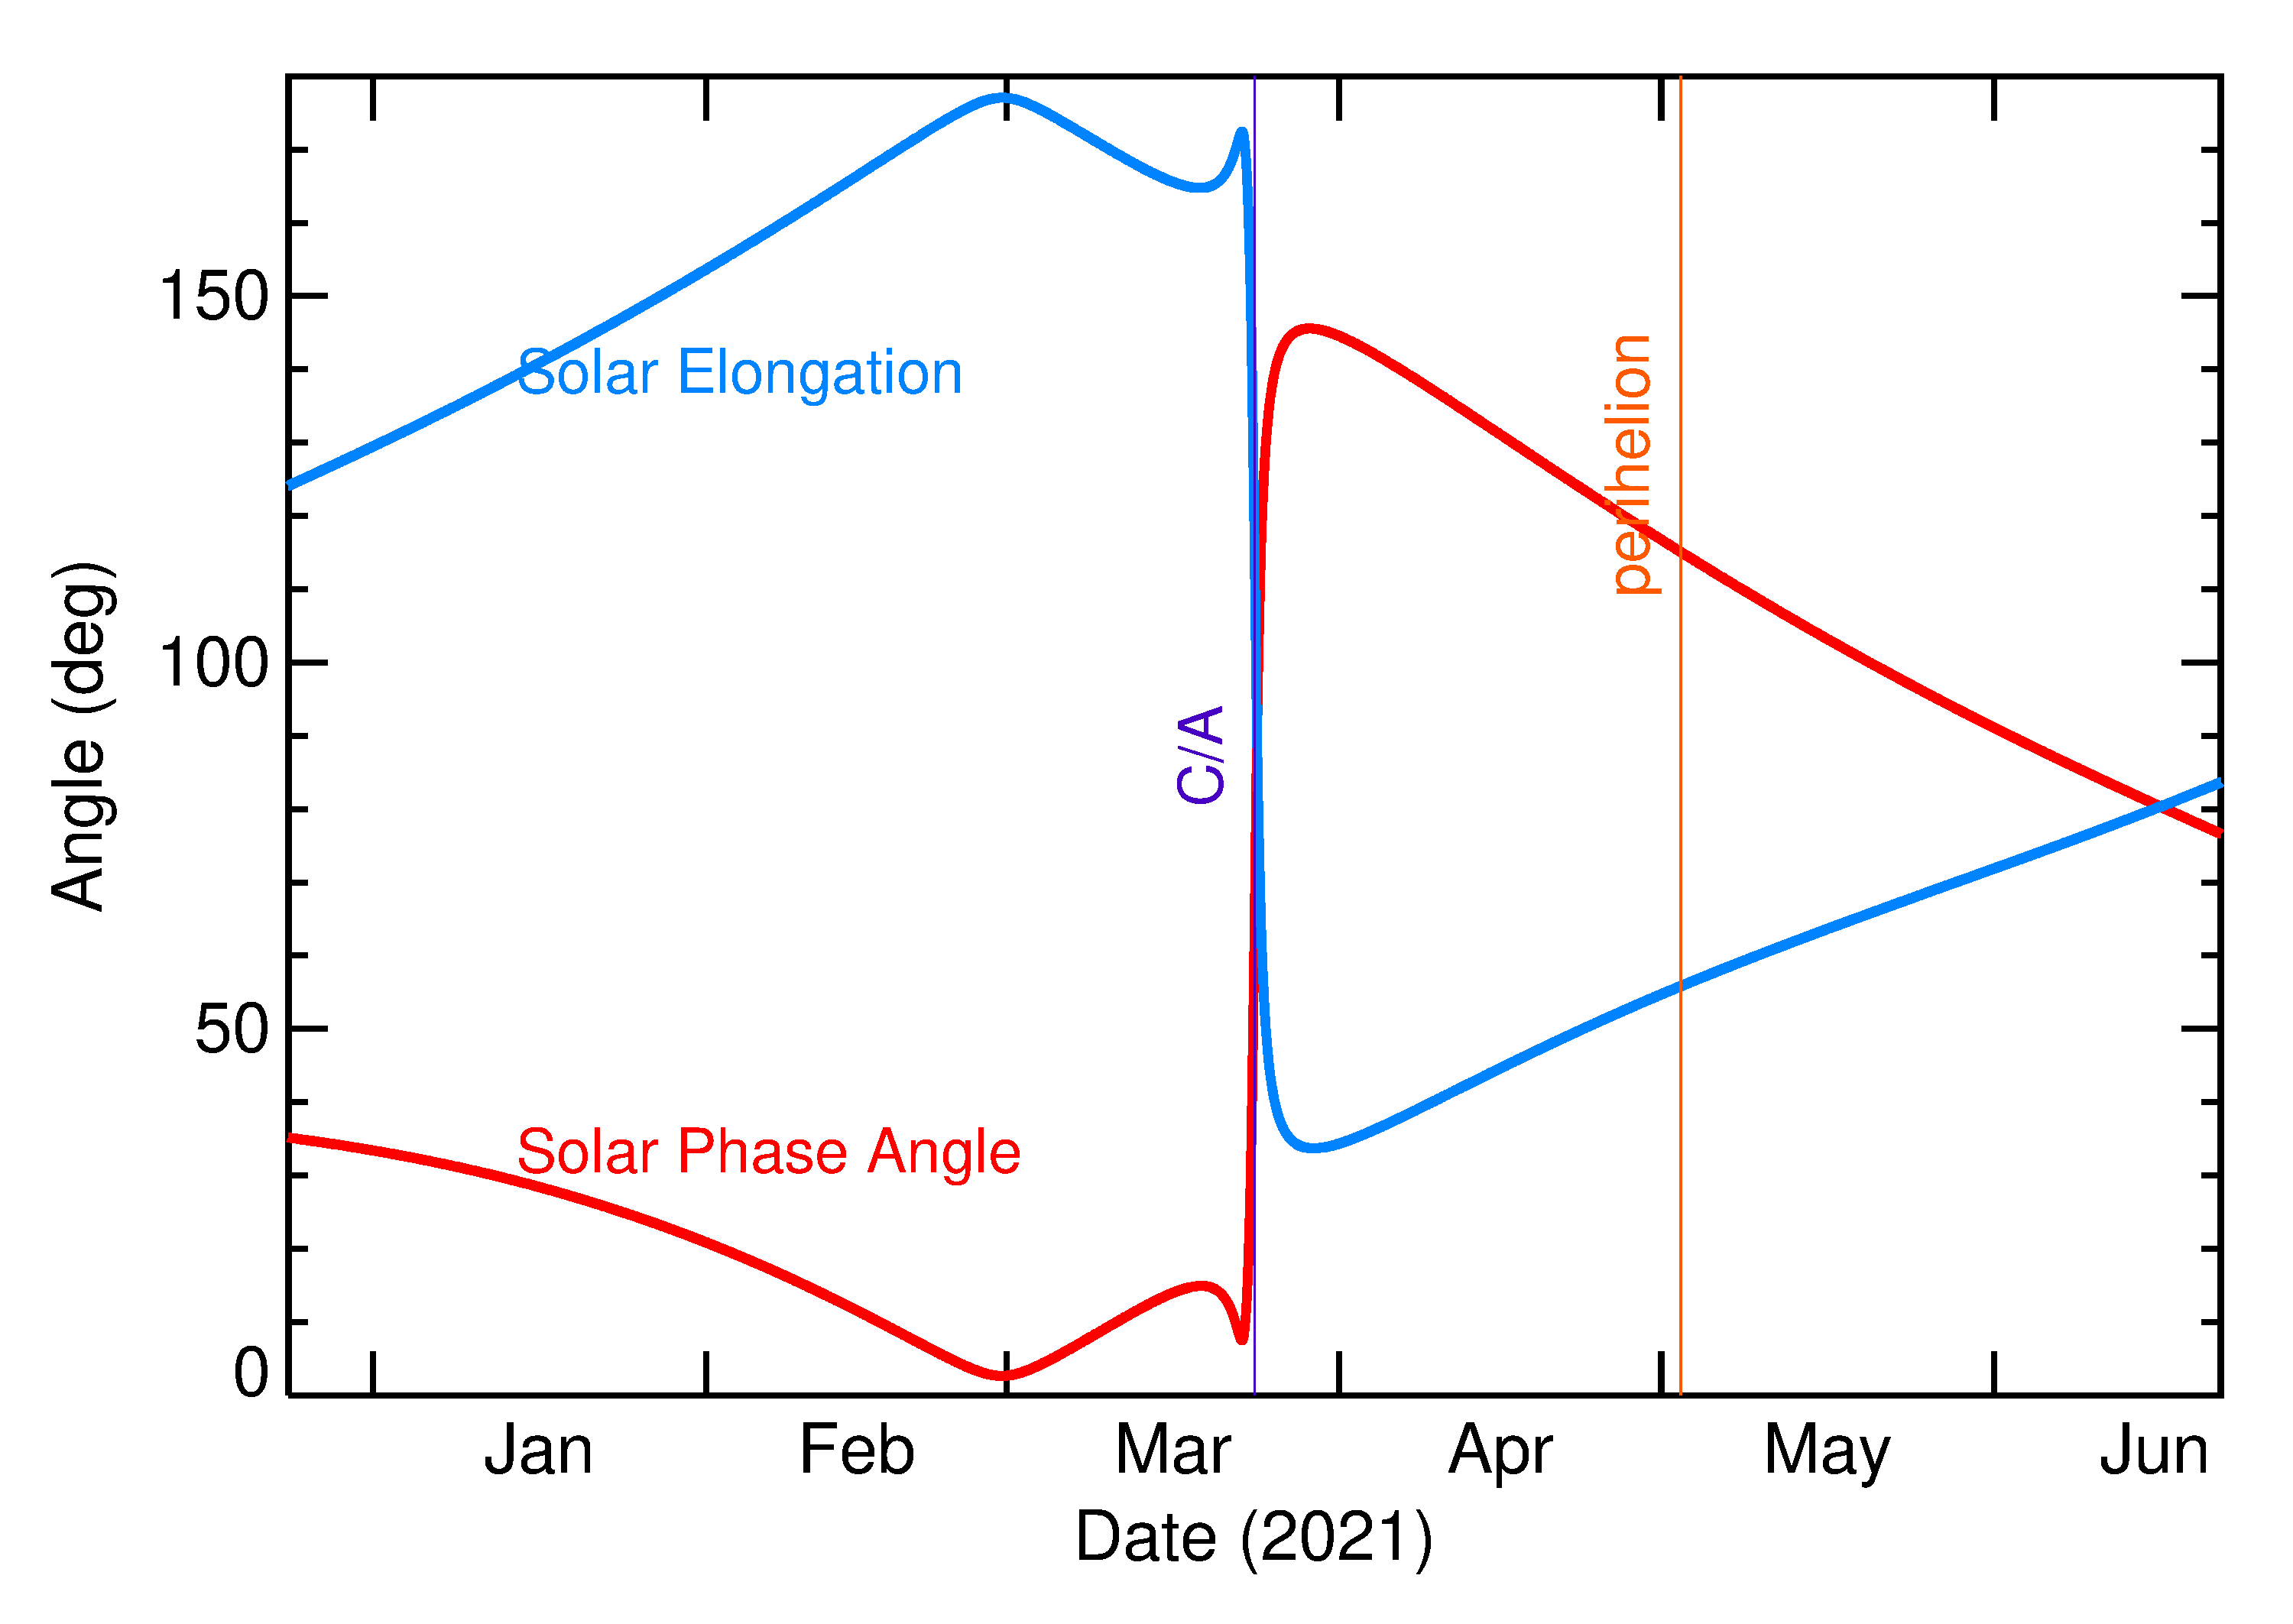 Solar Elongation and Solar Phase Angle of 2021 FO1 in the months around closest approach